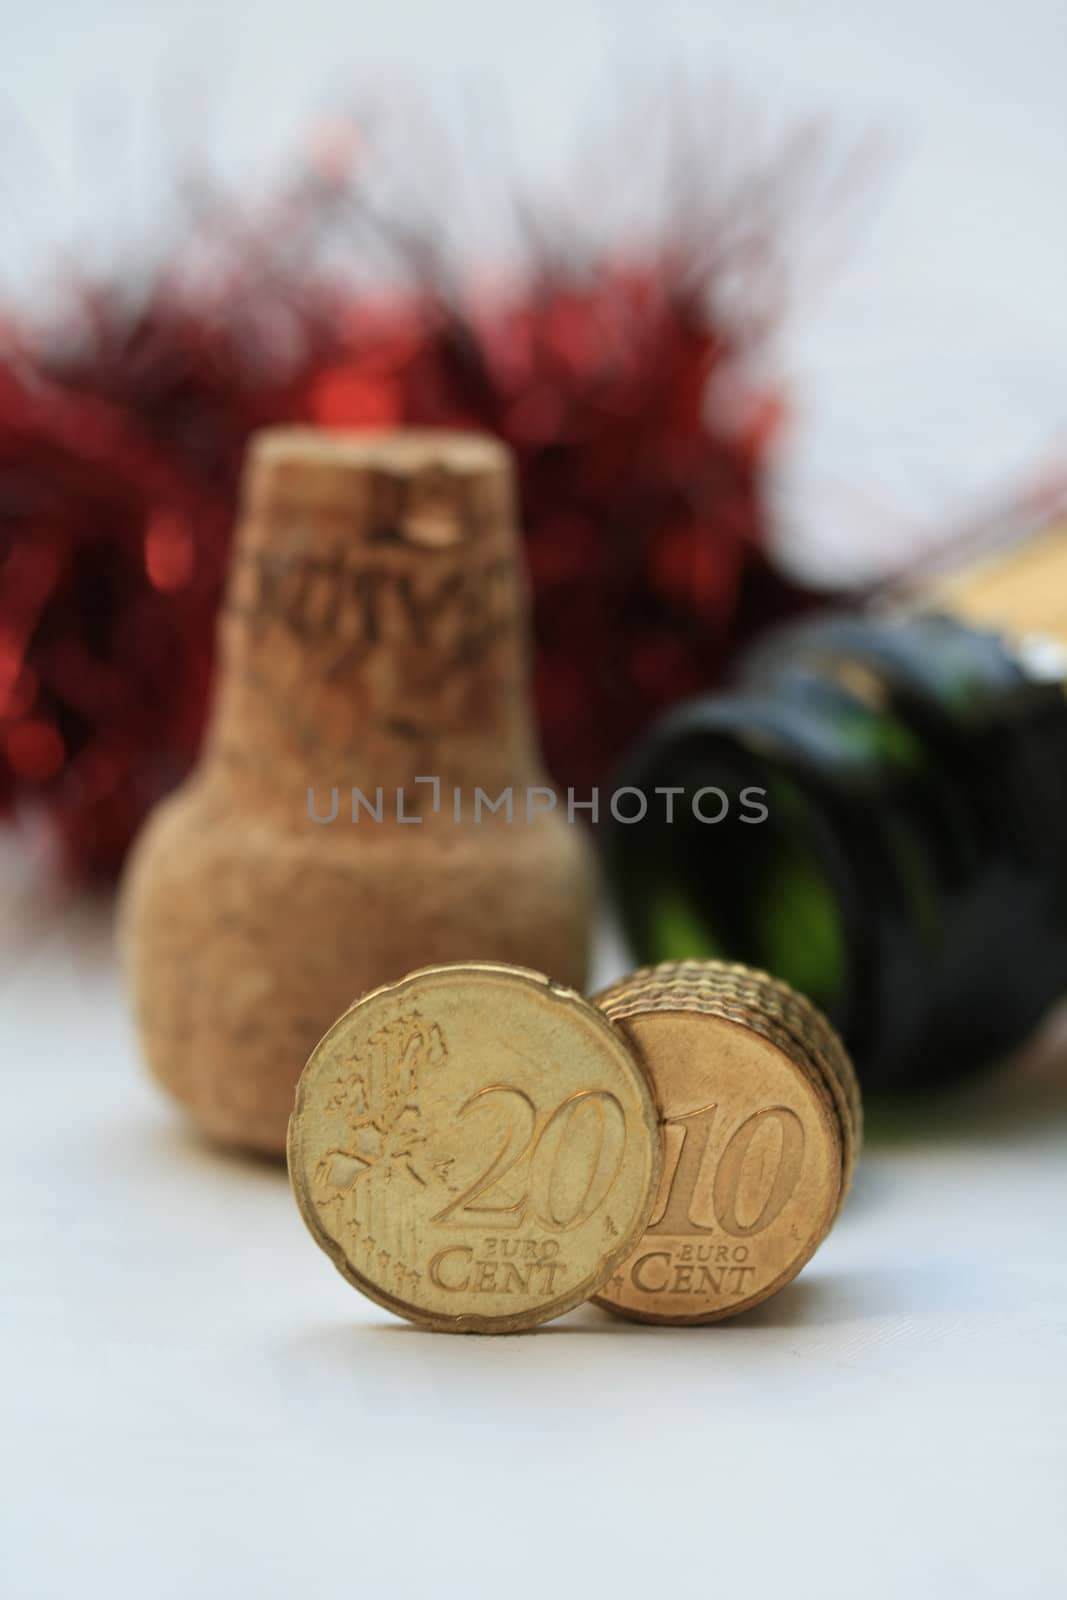 Two euro coins in front of an open champagne bottle and cork